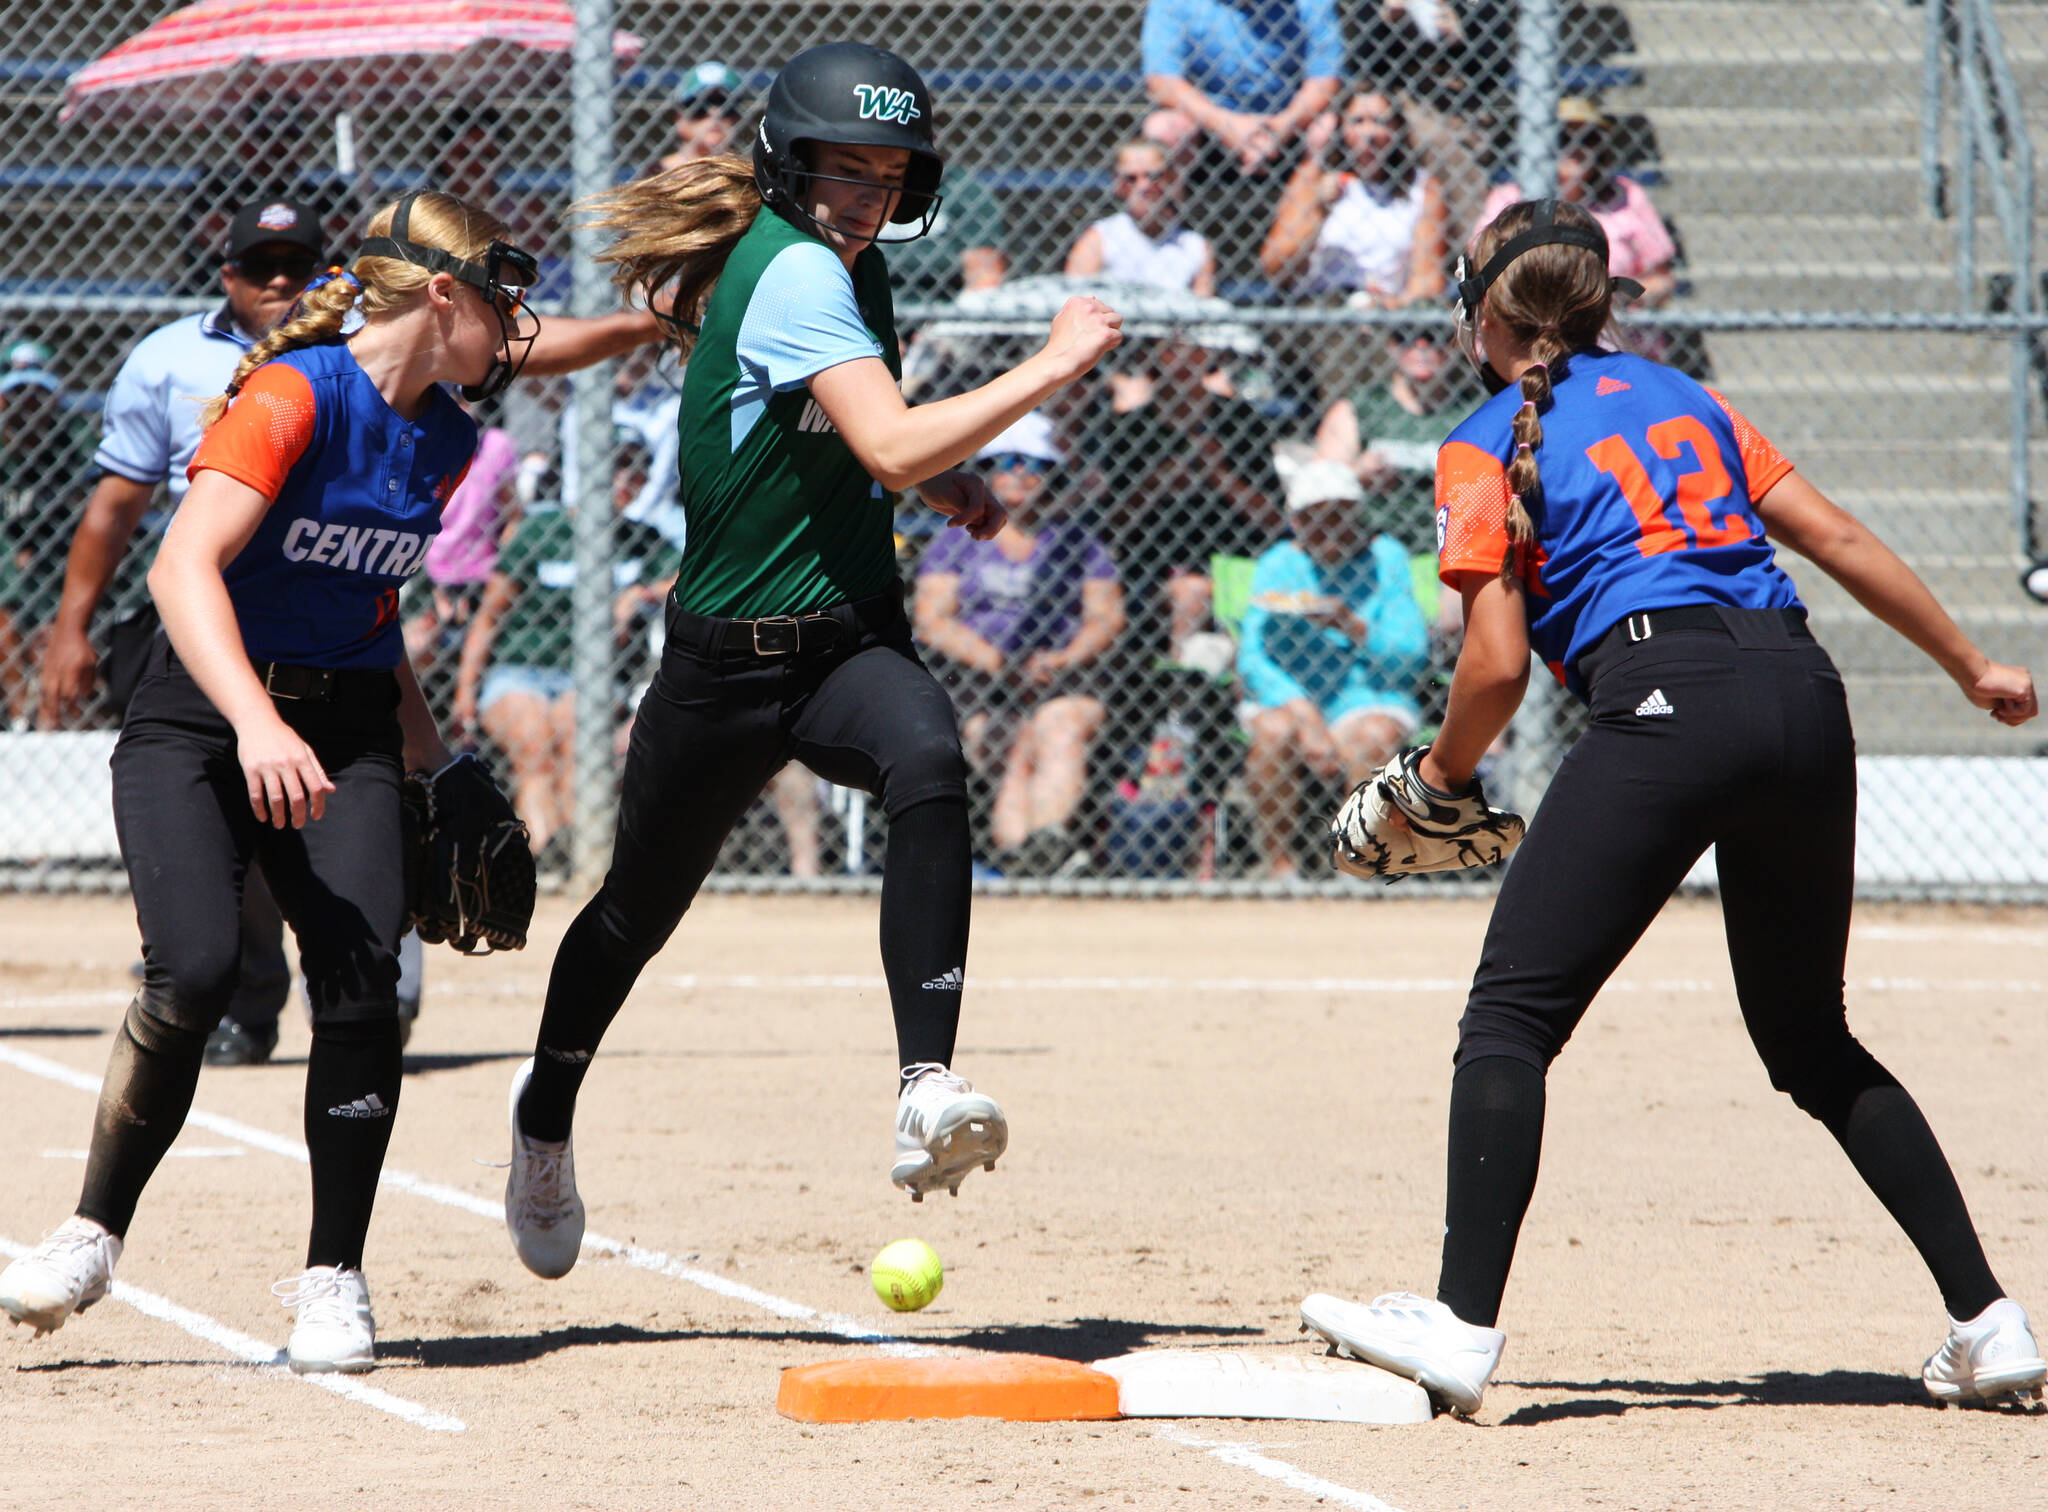 Redmond West Little League’s Ainsley Barcalow runs up the base line and is safe at first during today’s game at the Junior League Softball World Series at Everest Park in Kirkland. The Central team from Jenison, Michigan, won, 4-2, in the pool play matchup. Redmond represents Washington District 9. Andy Nystrom/ staff photo